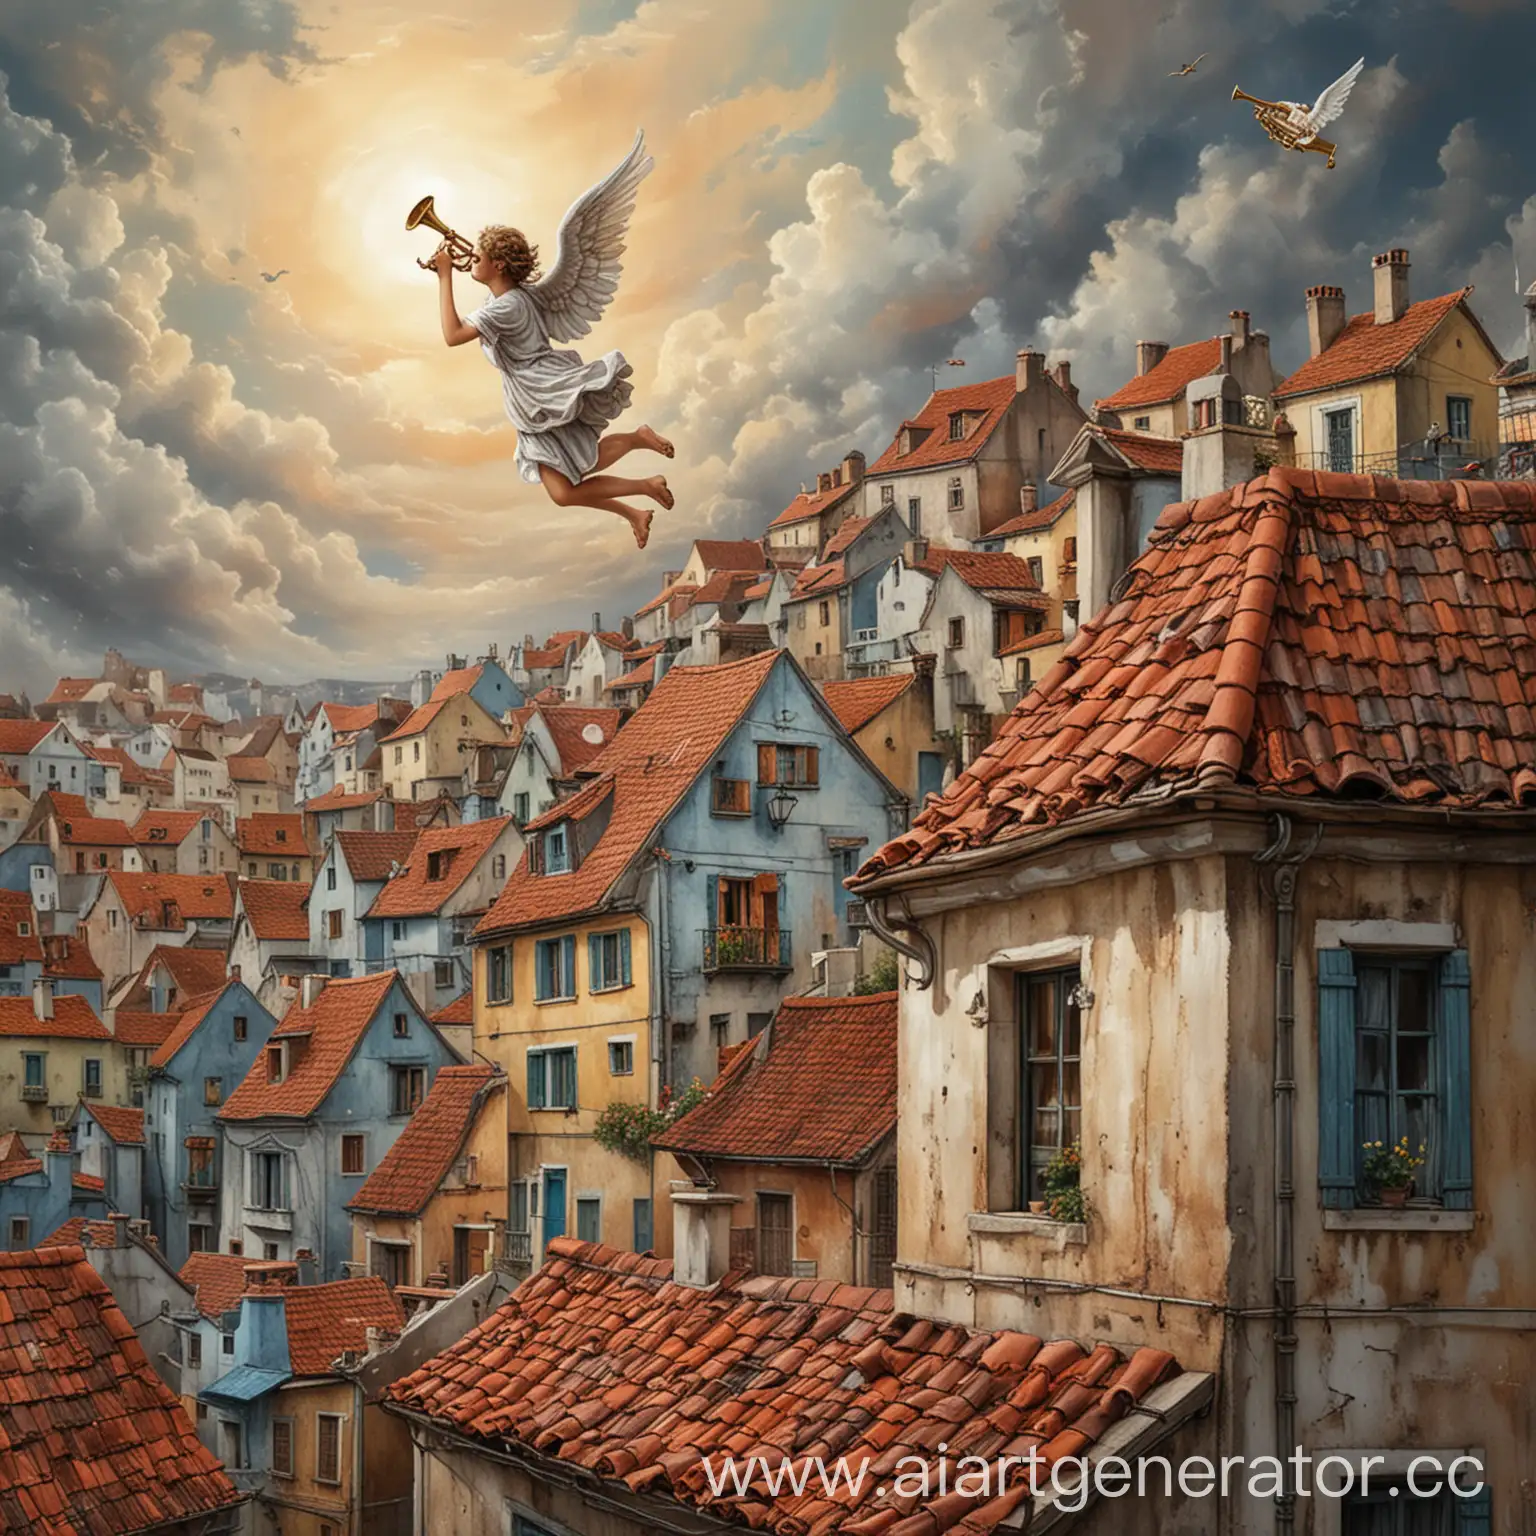 RoofTop-Angel-Playing-Trumpet-Over-Colorful-Street-Houses